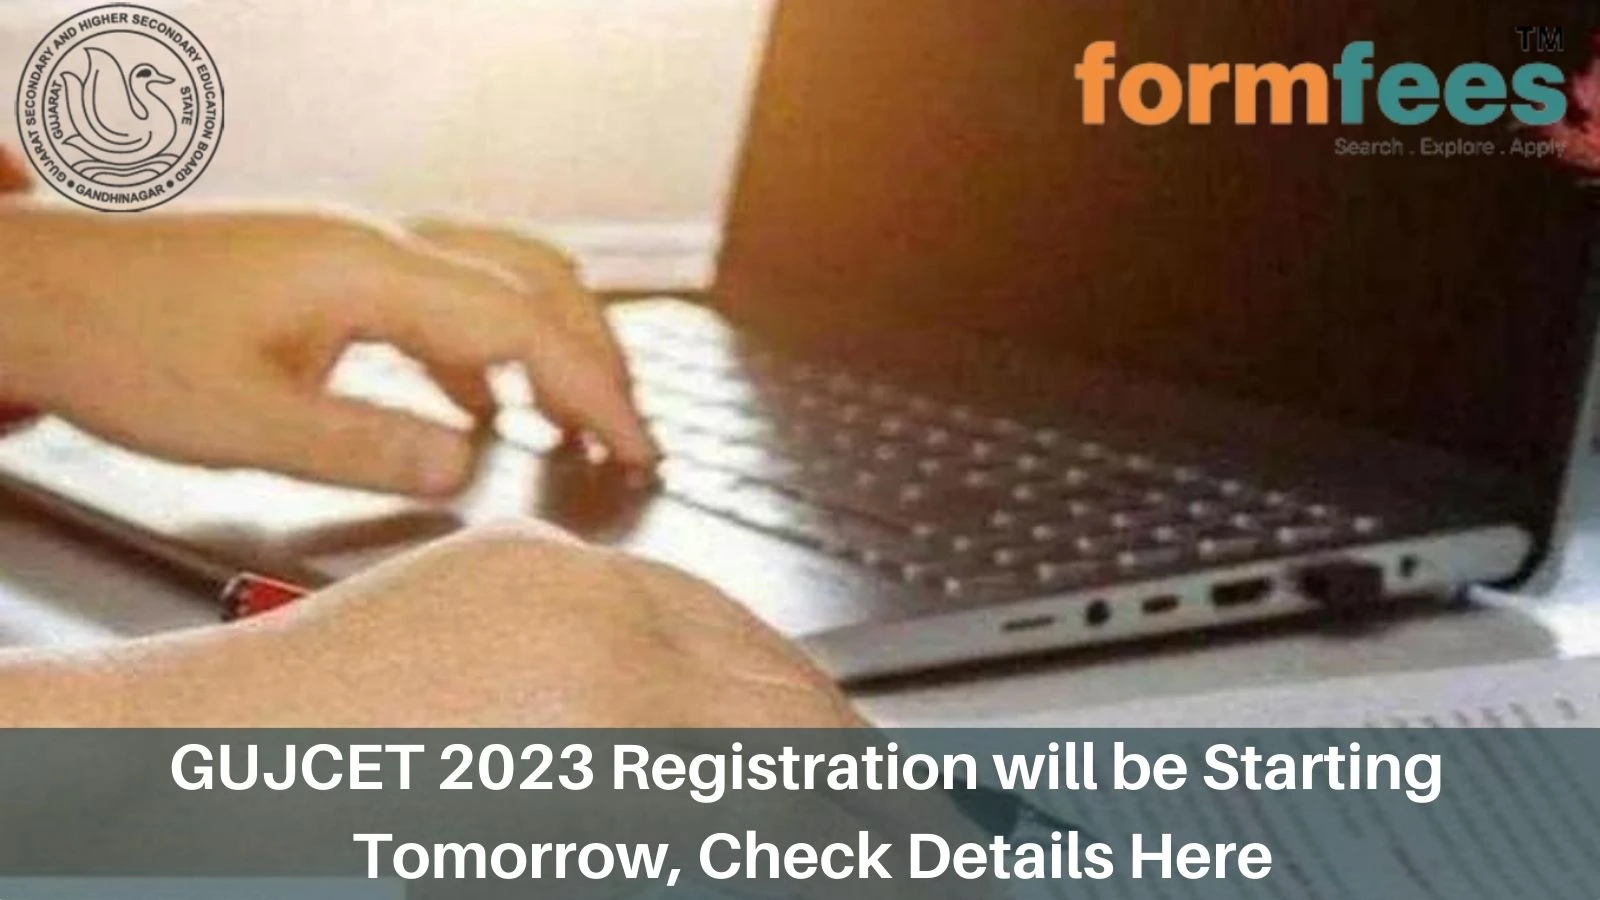 GUJCET 2023 Registration will be Starting Tomorrow, Check Details Here